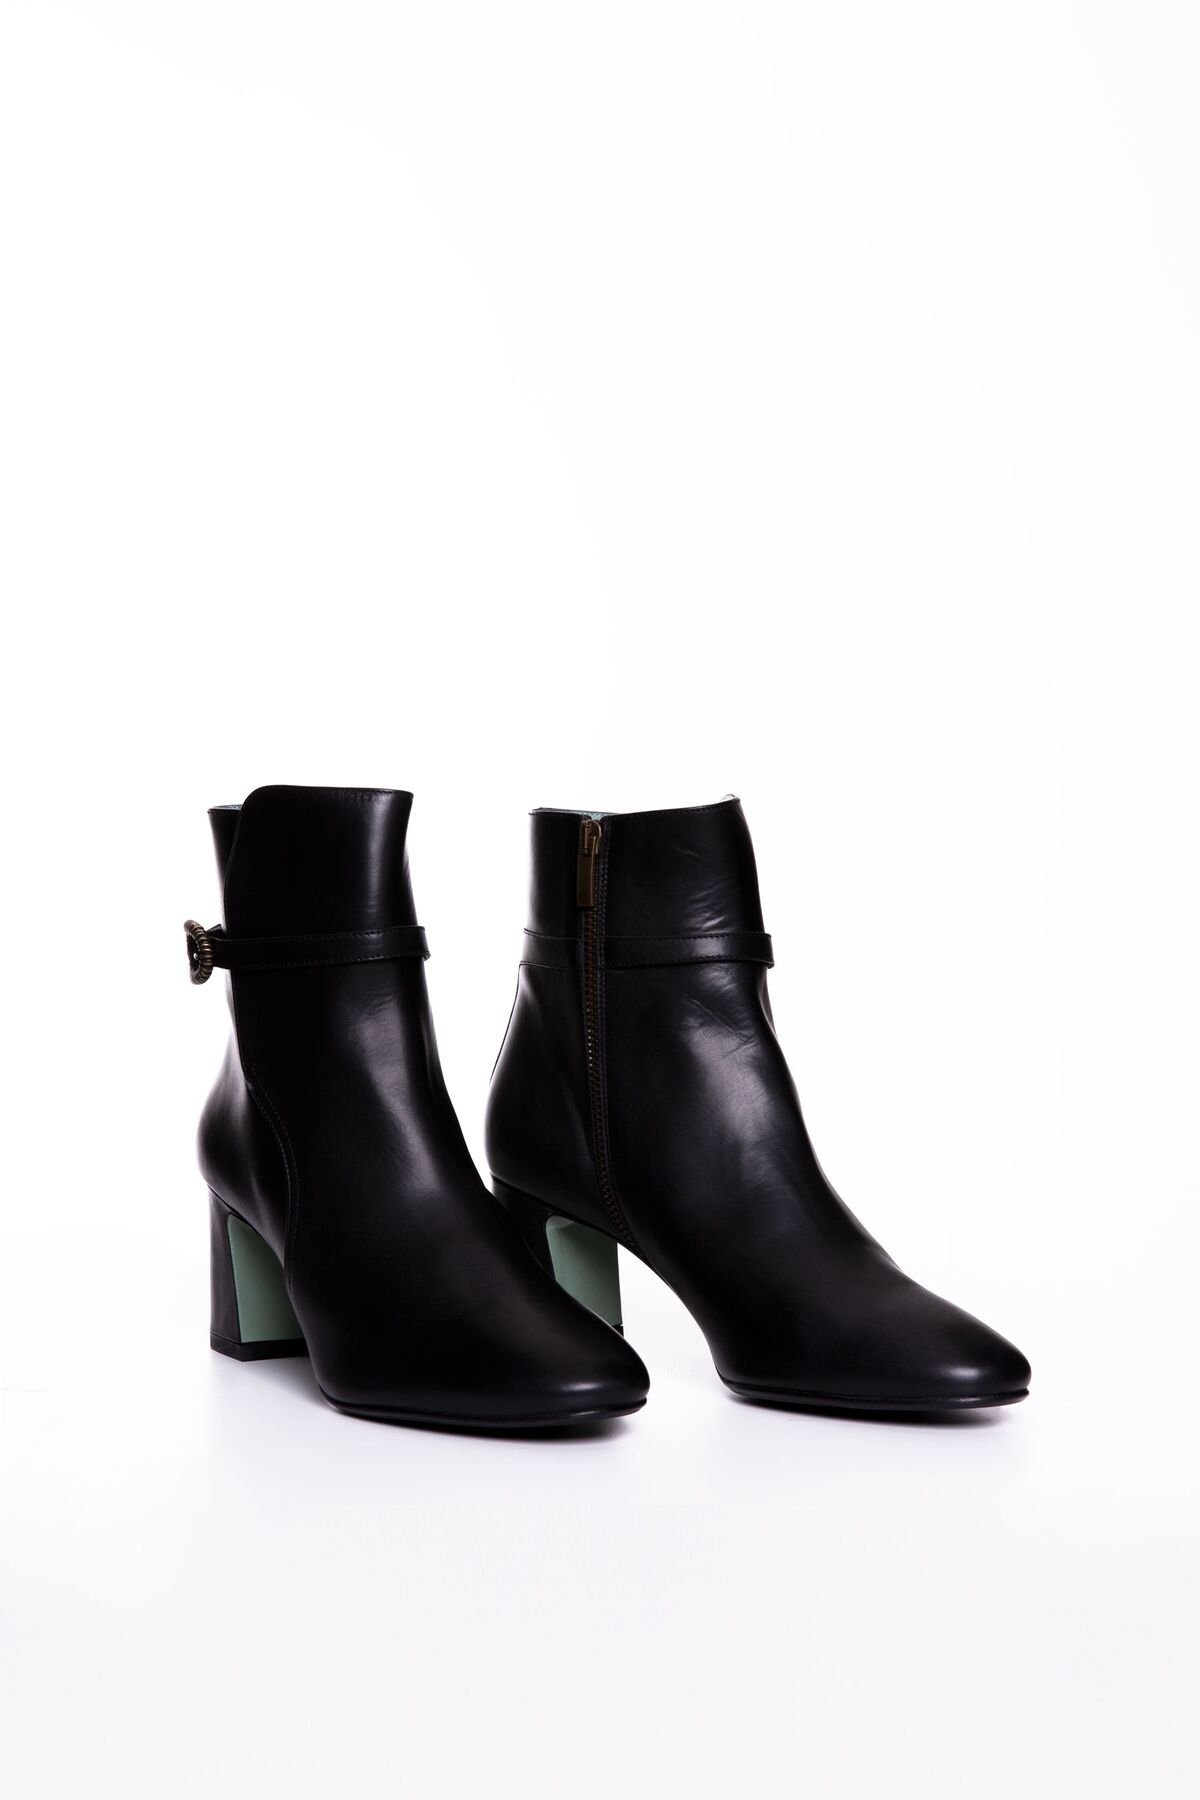 Buckle Detailed Black Heeled Boots